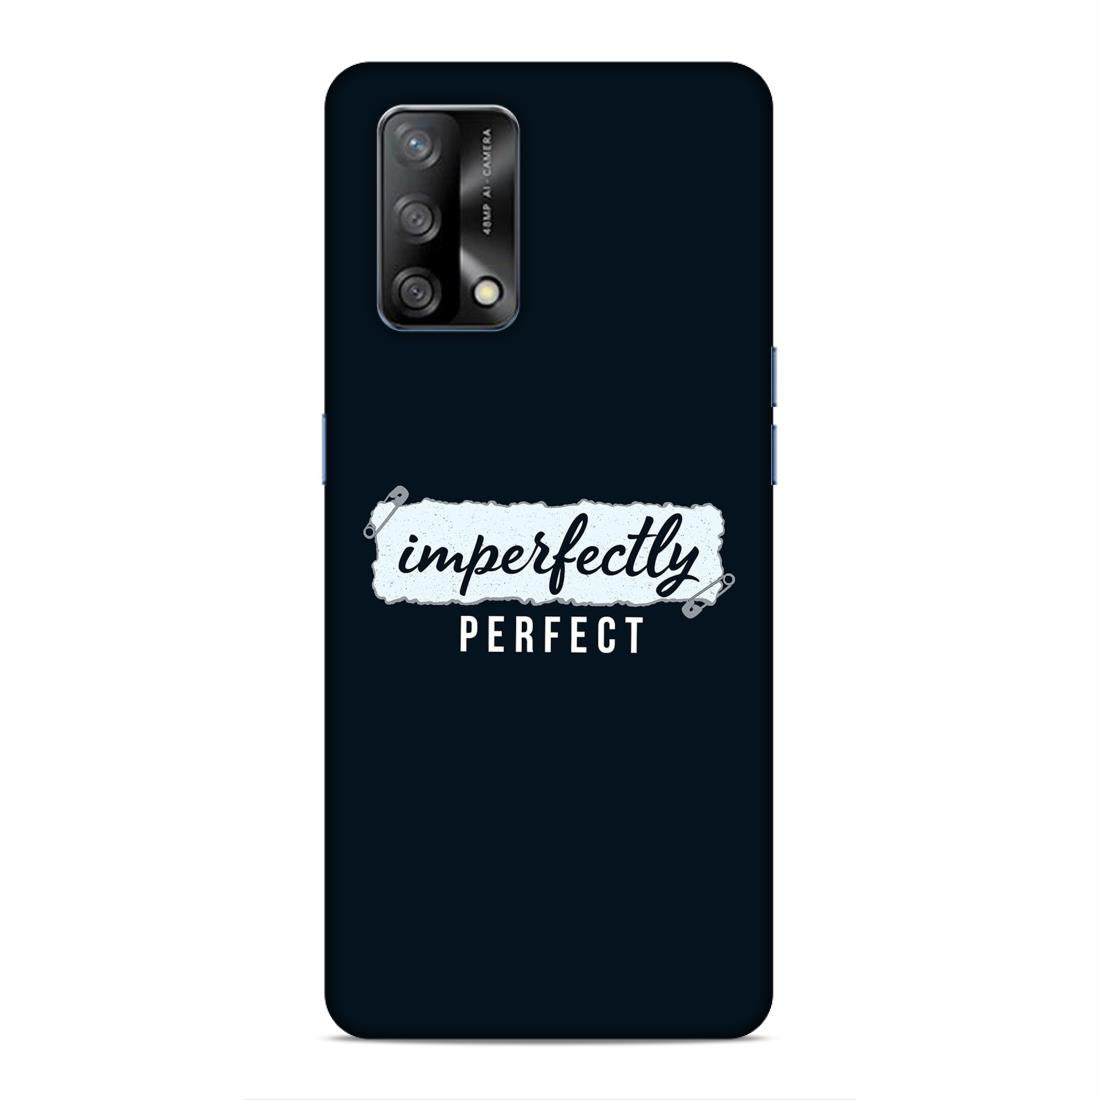 Imperfectely Perfect Hard Back Case For Oppo F19 / F19s